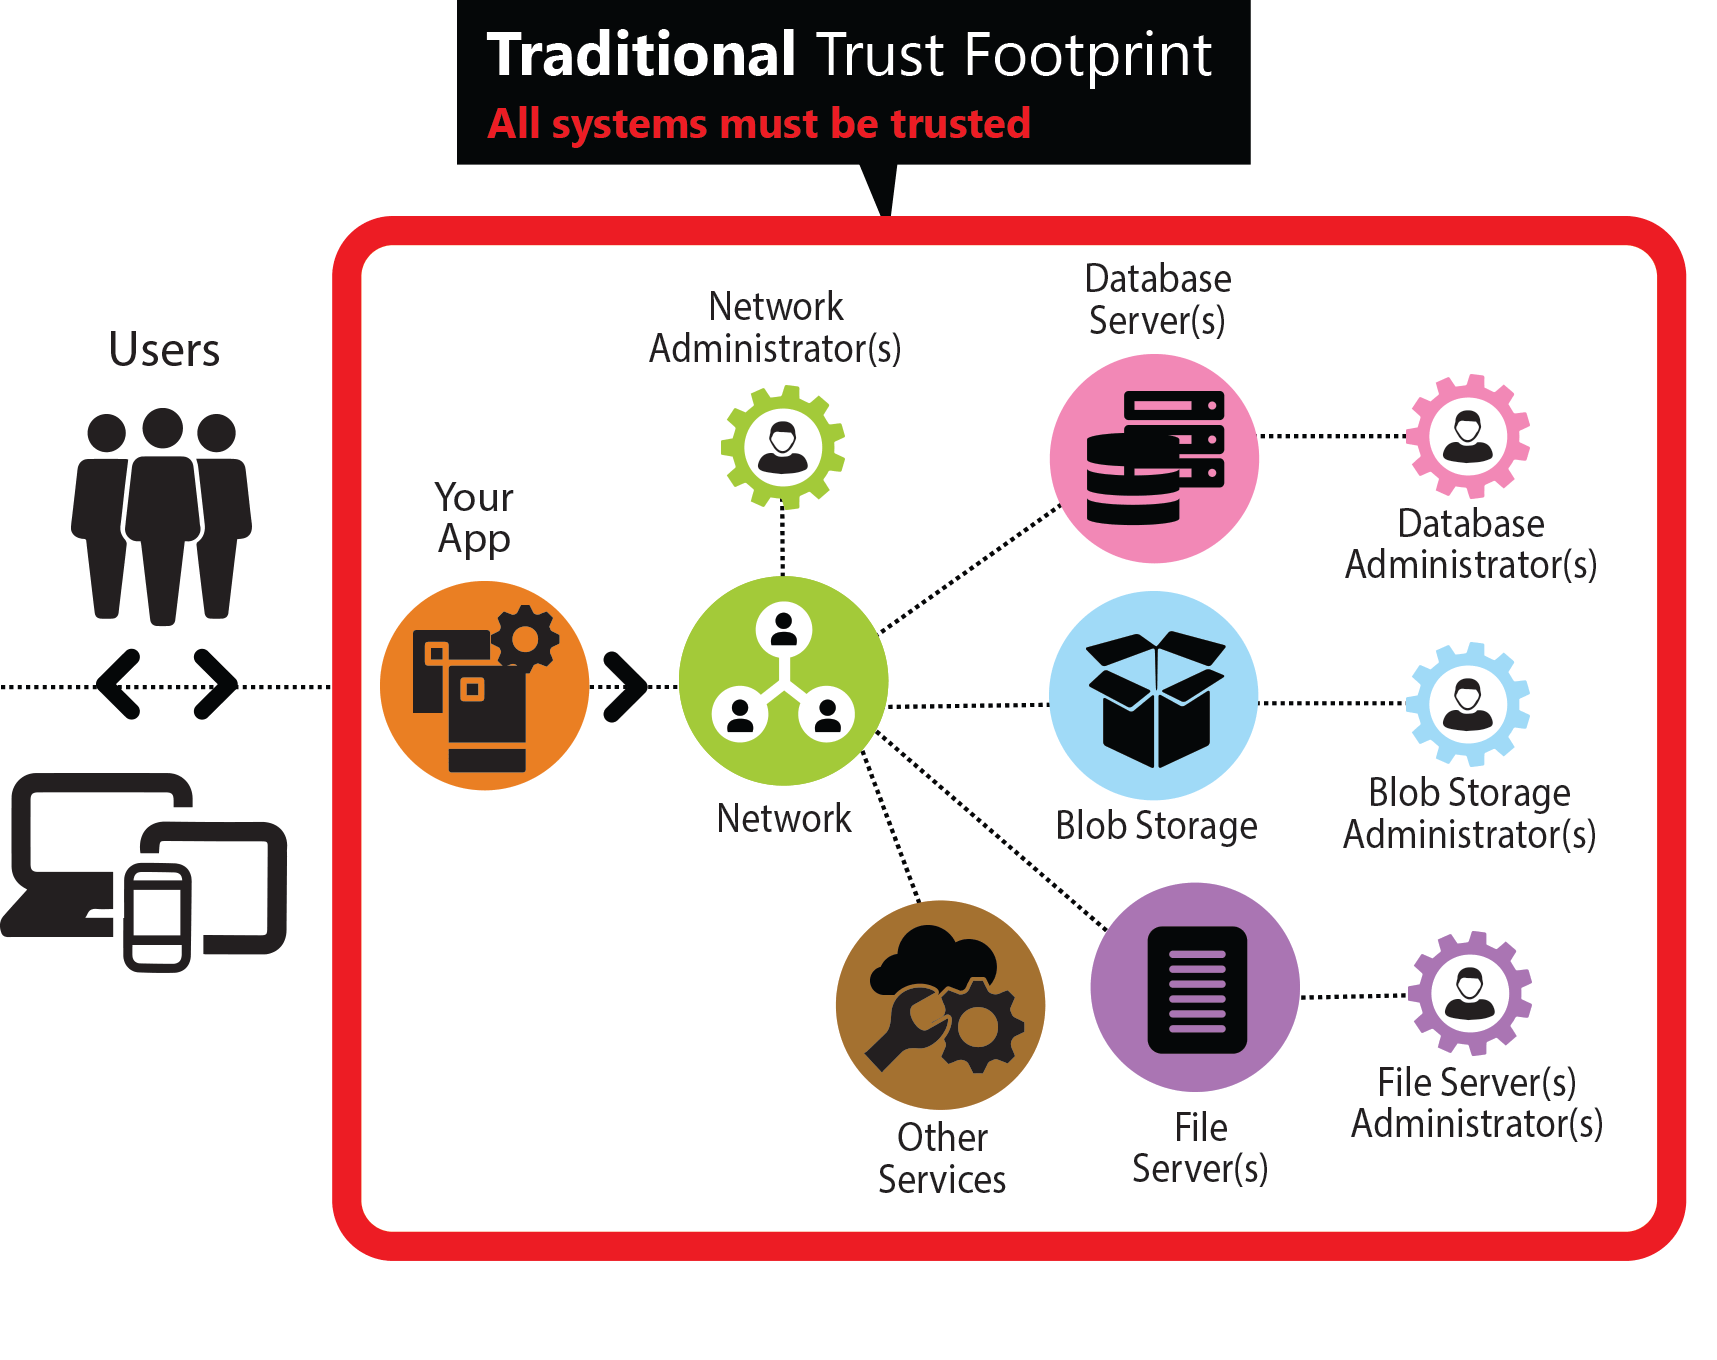 The traditional trust footprint does not reduce data breaches